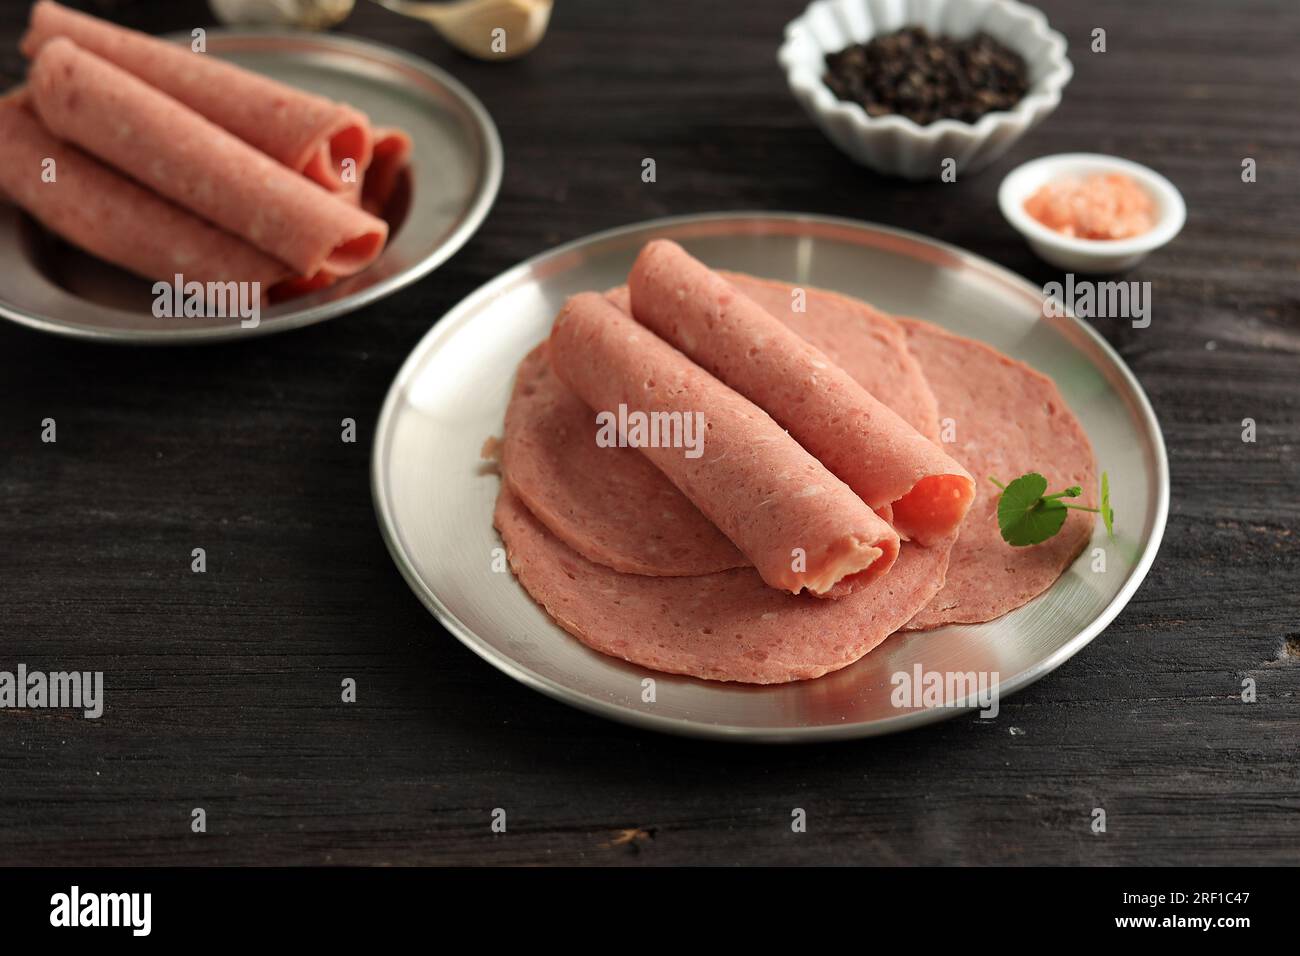 Smoked Beef Salami, Thin Sliced Sausage on Wooden Table Stock Photo